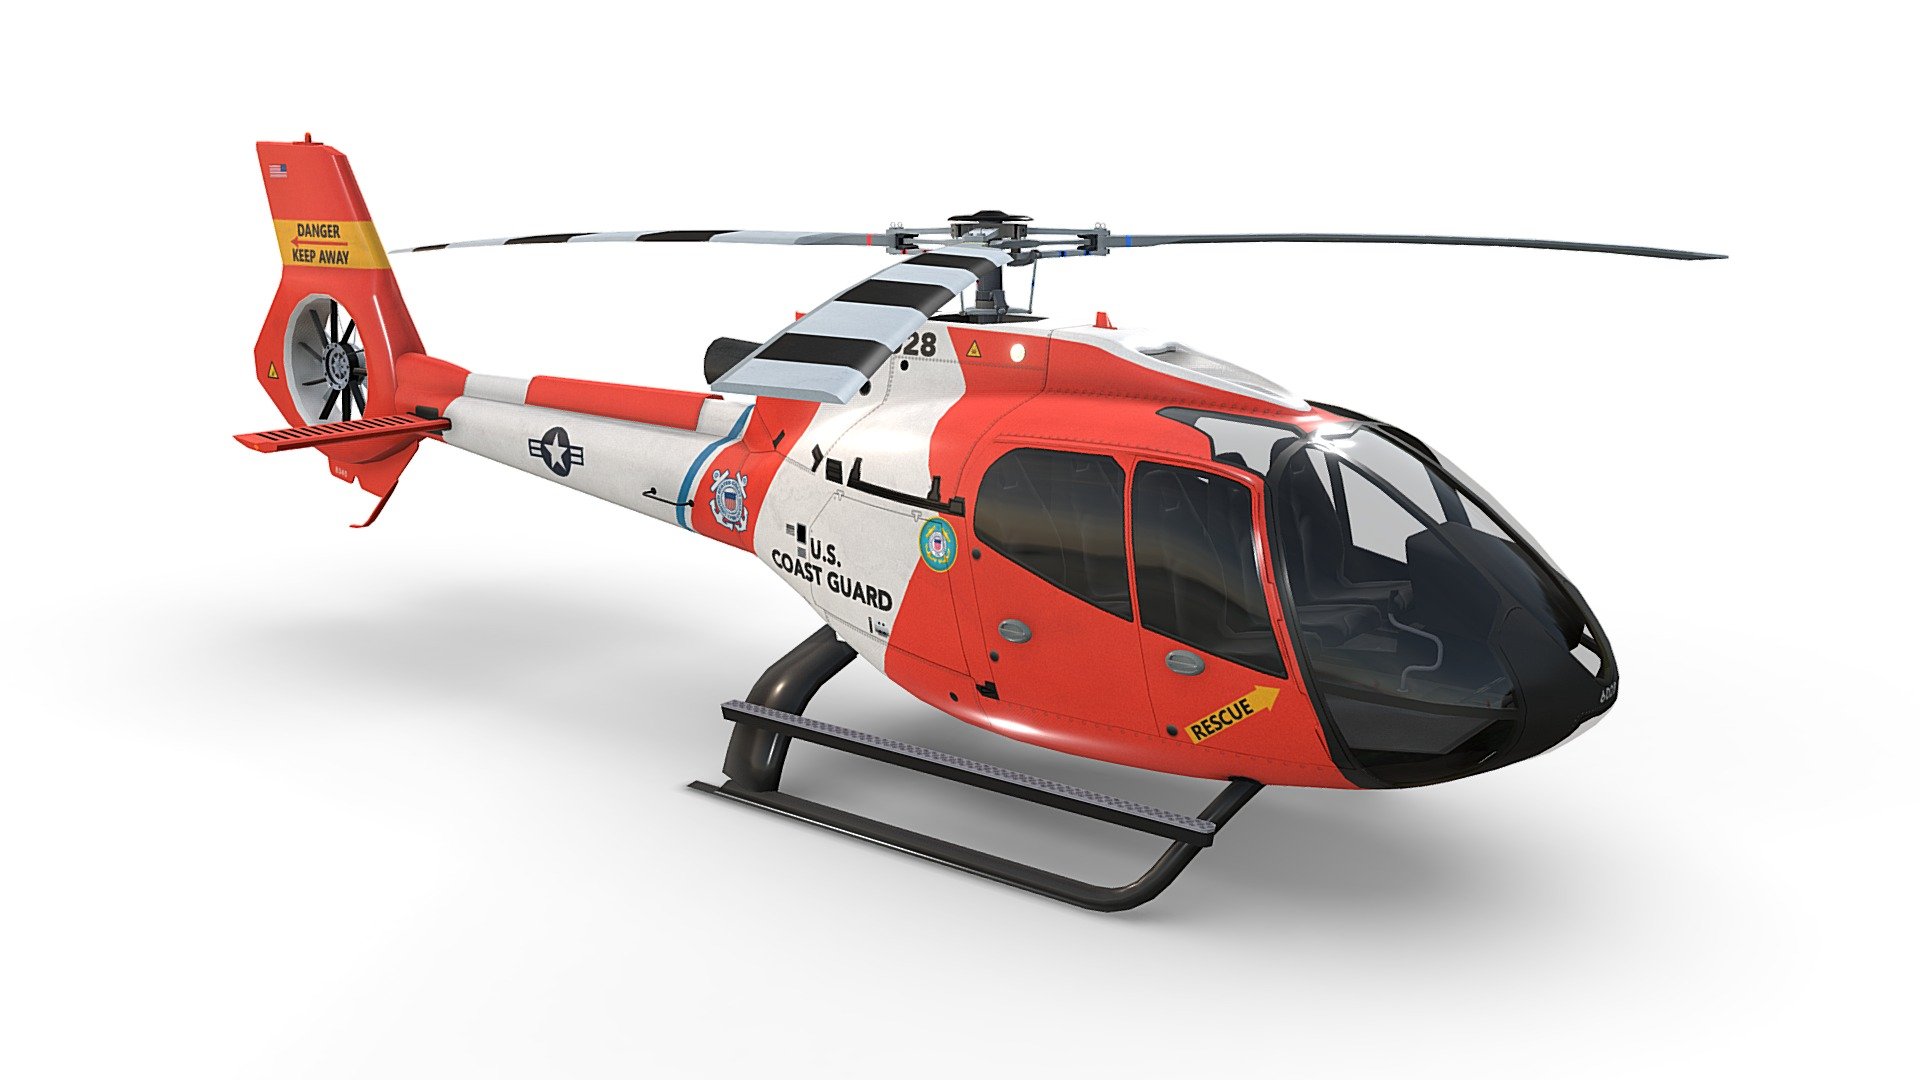 US Coast Guard Helicopter Airbus H130 Livery 33. Game ready, realtime optimized Airbus Helicopter H130 with high visual accuracy. Both PBR workflows ready native 4096 x 4096 px textures. Clean lowpoly mesh with 4 preconfigured level of details LOD0 19710 tris, LOD1 10462 tris, LOD2 7388 tris, LOD3 5990 tris. Properly placed rotors pivots for flawless rotations. Simple capsule built interior that fits perfectly the body. 100% human controlled triangulation. All parts 100% unwrapped non-overlapping. Made using blueprints in real world scale meters. Included are flawless files .max (native 3dsmax 2014), .fbx, and .obj. All LOD are exported seperately and together in each file format 3d model